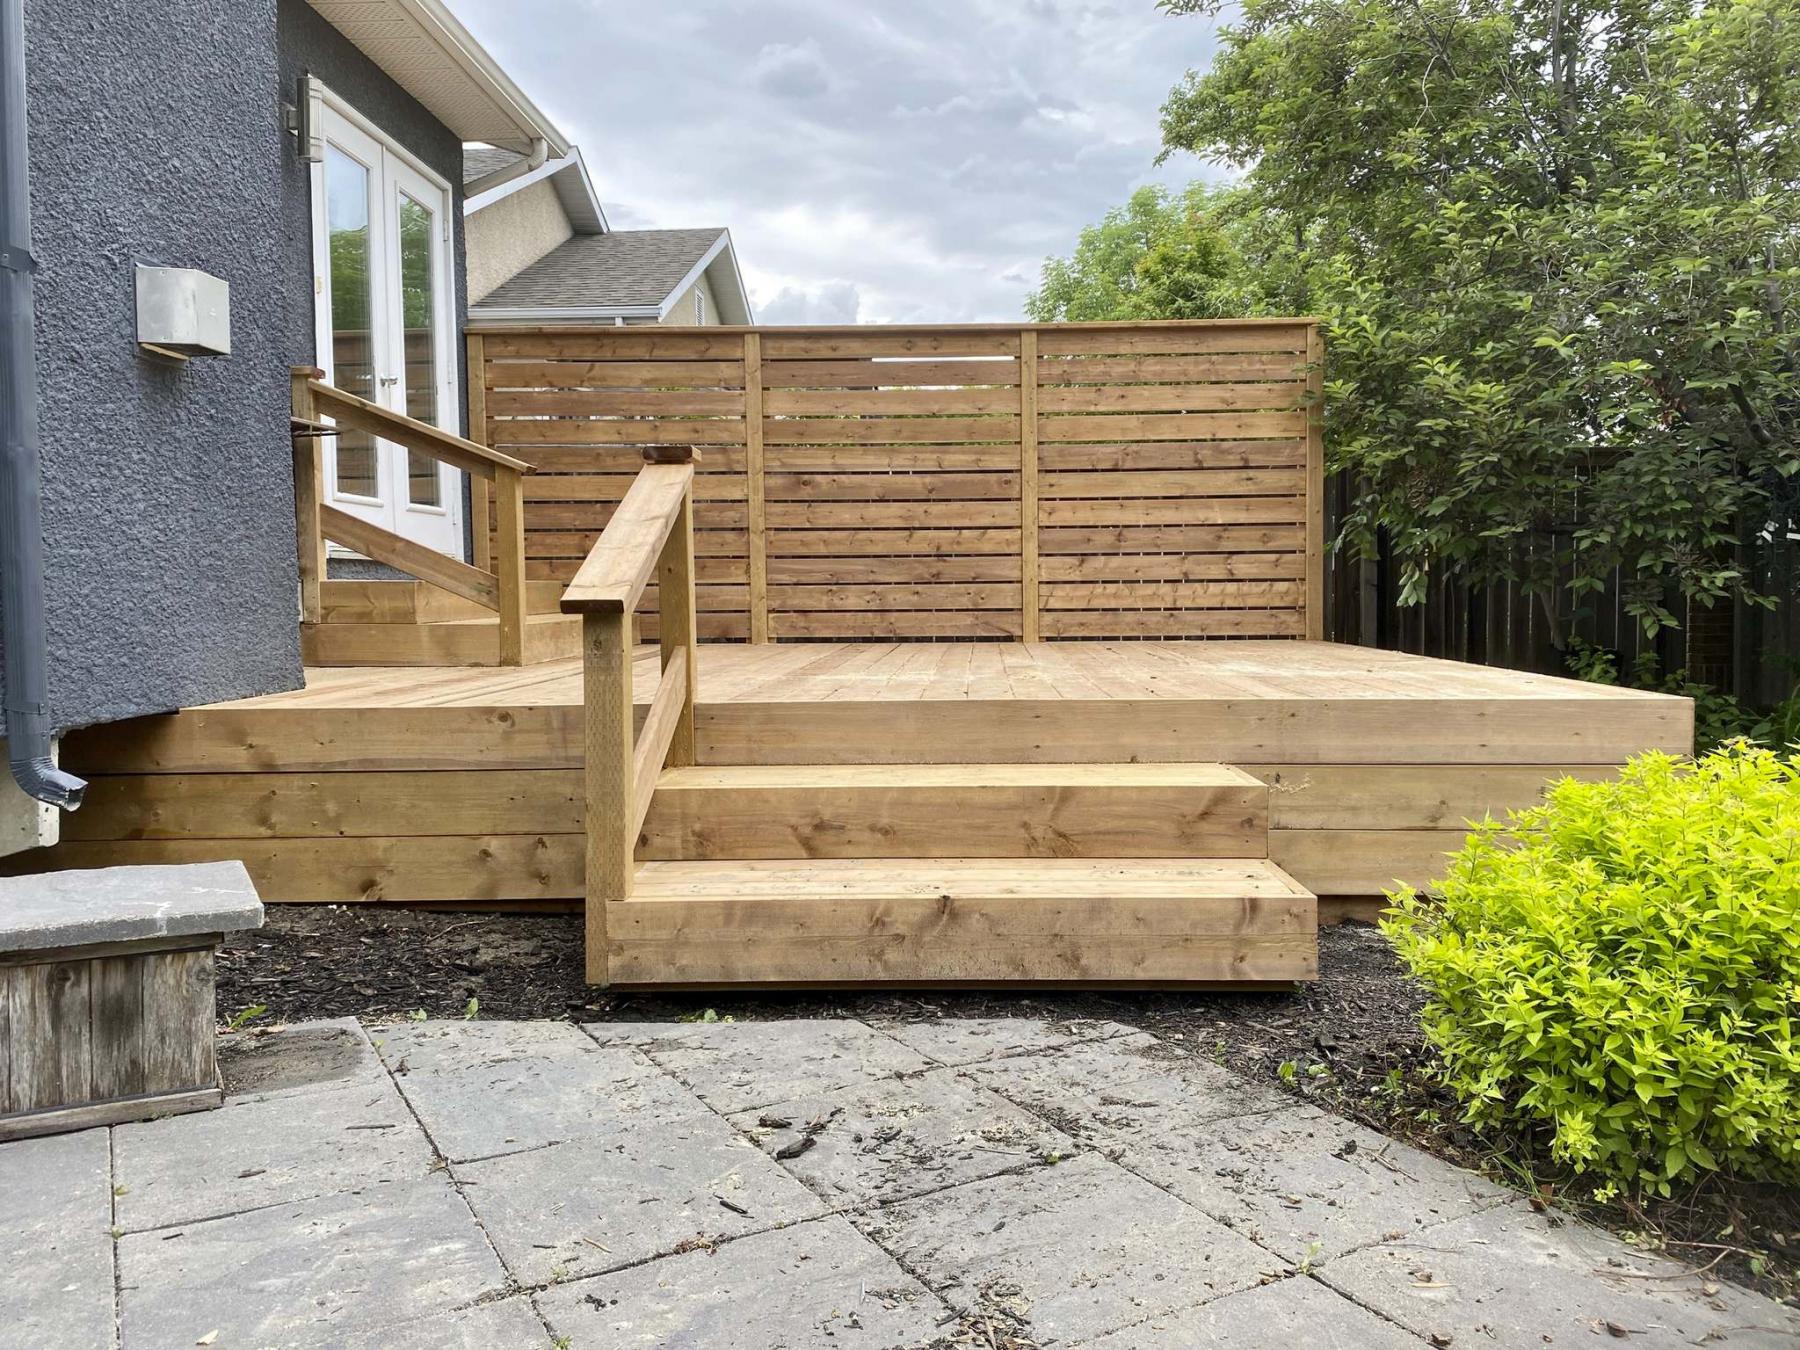 <p>Photos by Marc LaBossiere / Winnipeg Free Press</p><p>The deck layout allows access from ground-level to the deck surface, and patio doors.</p>